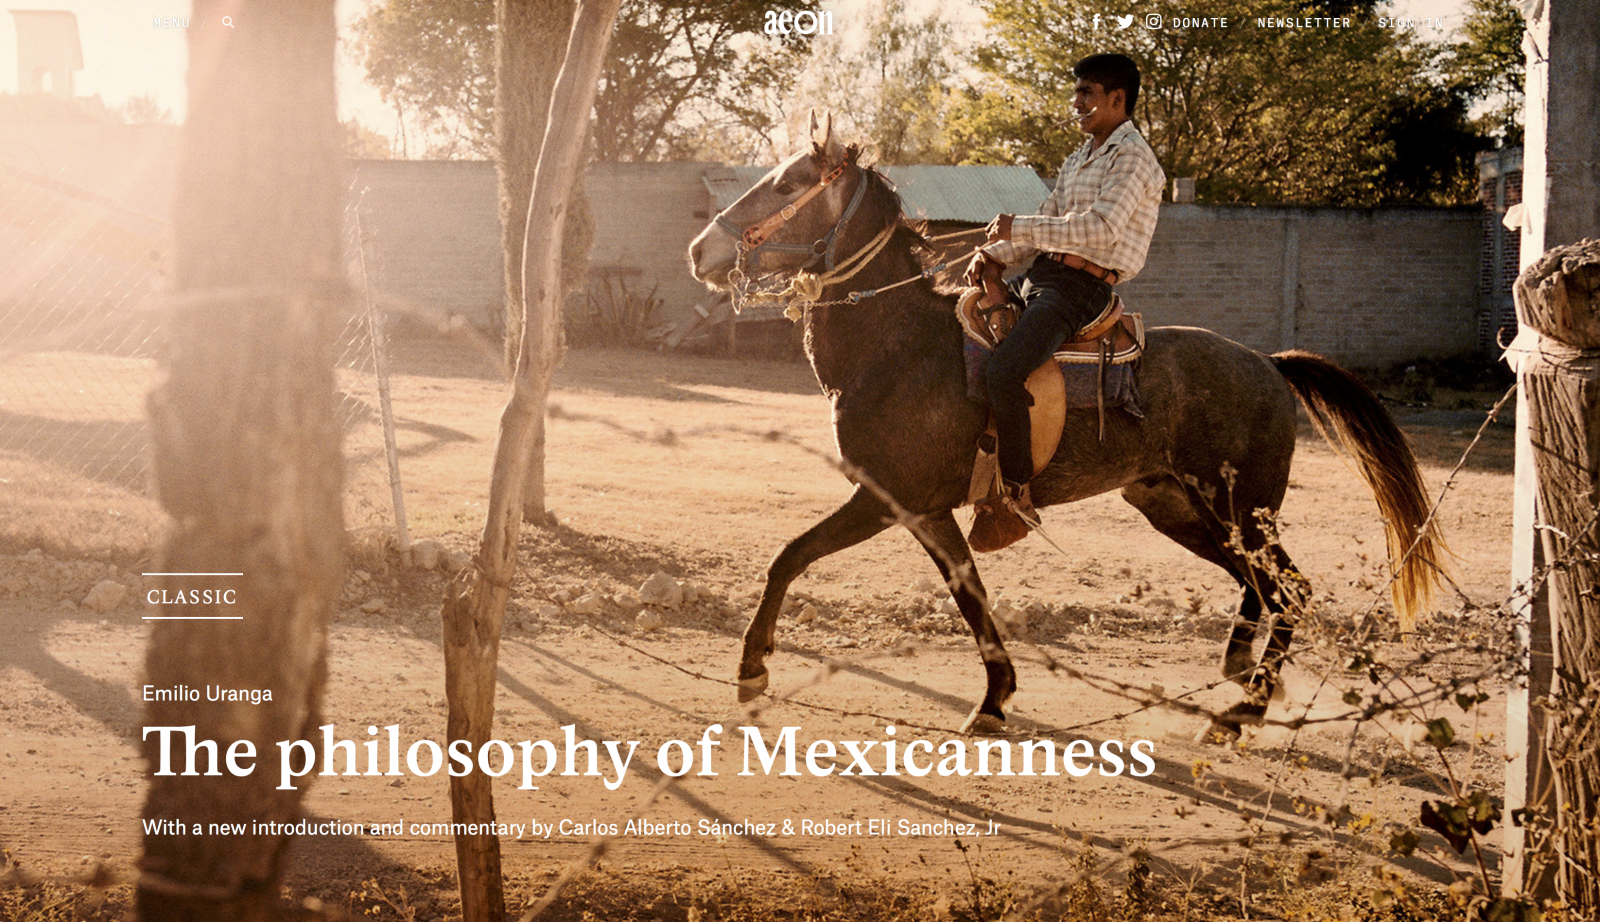 Thumbnail of The philosophy of Mexicanness